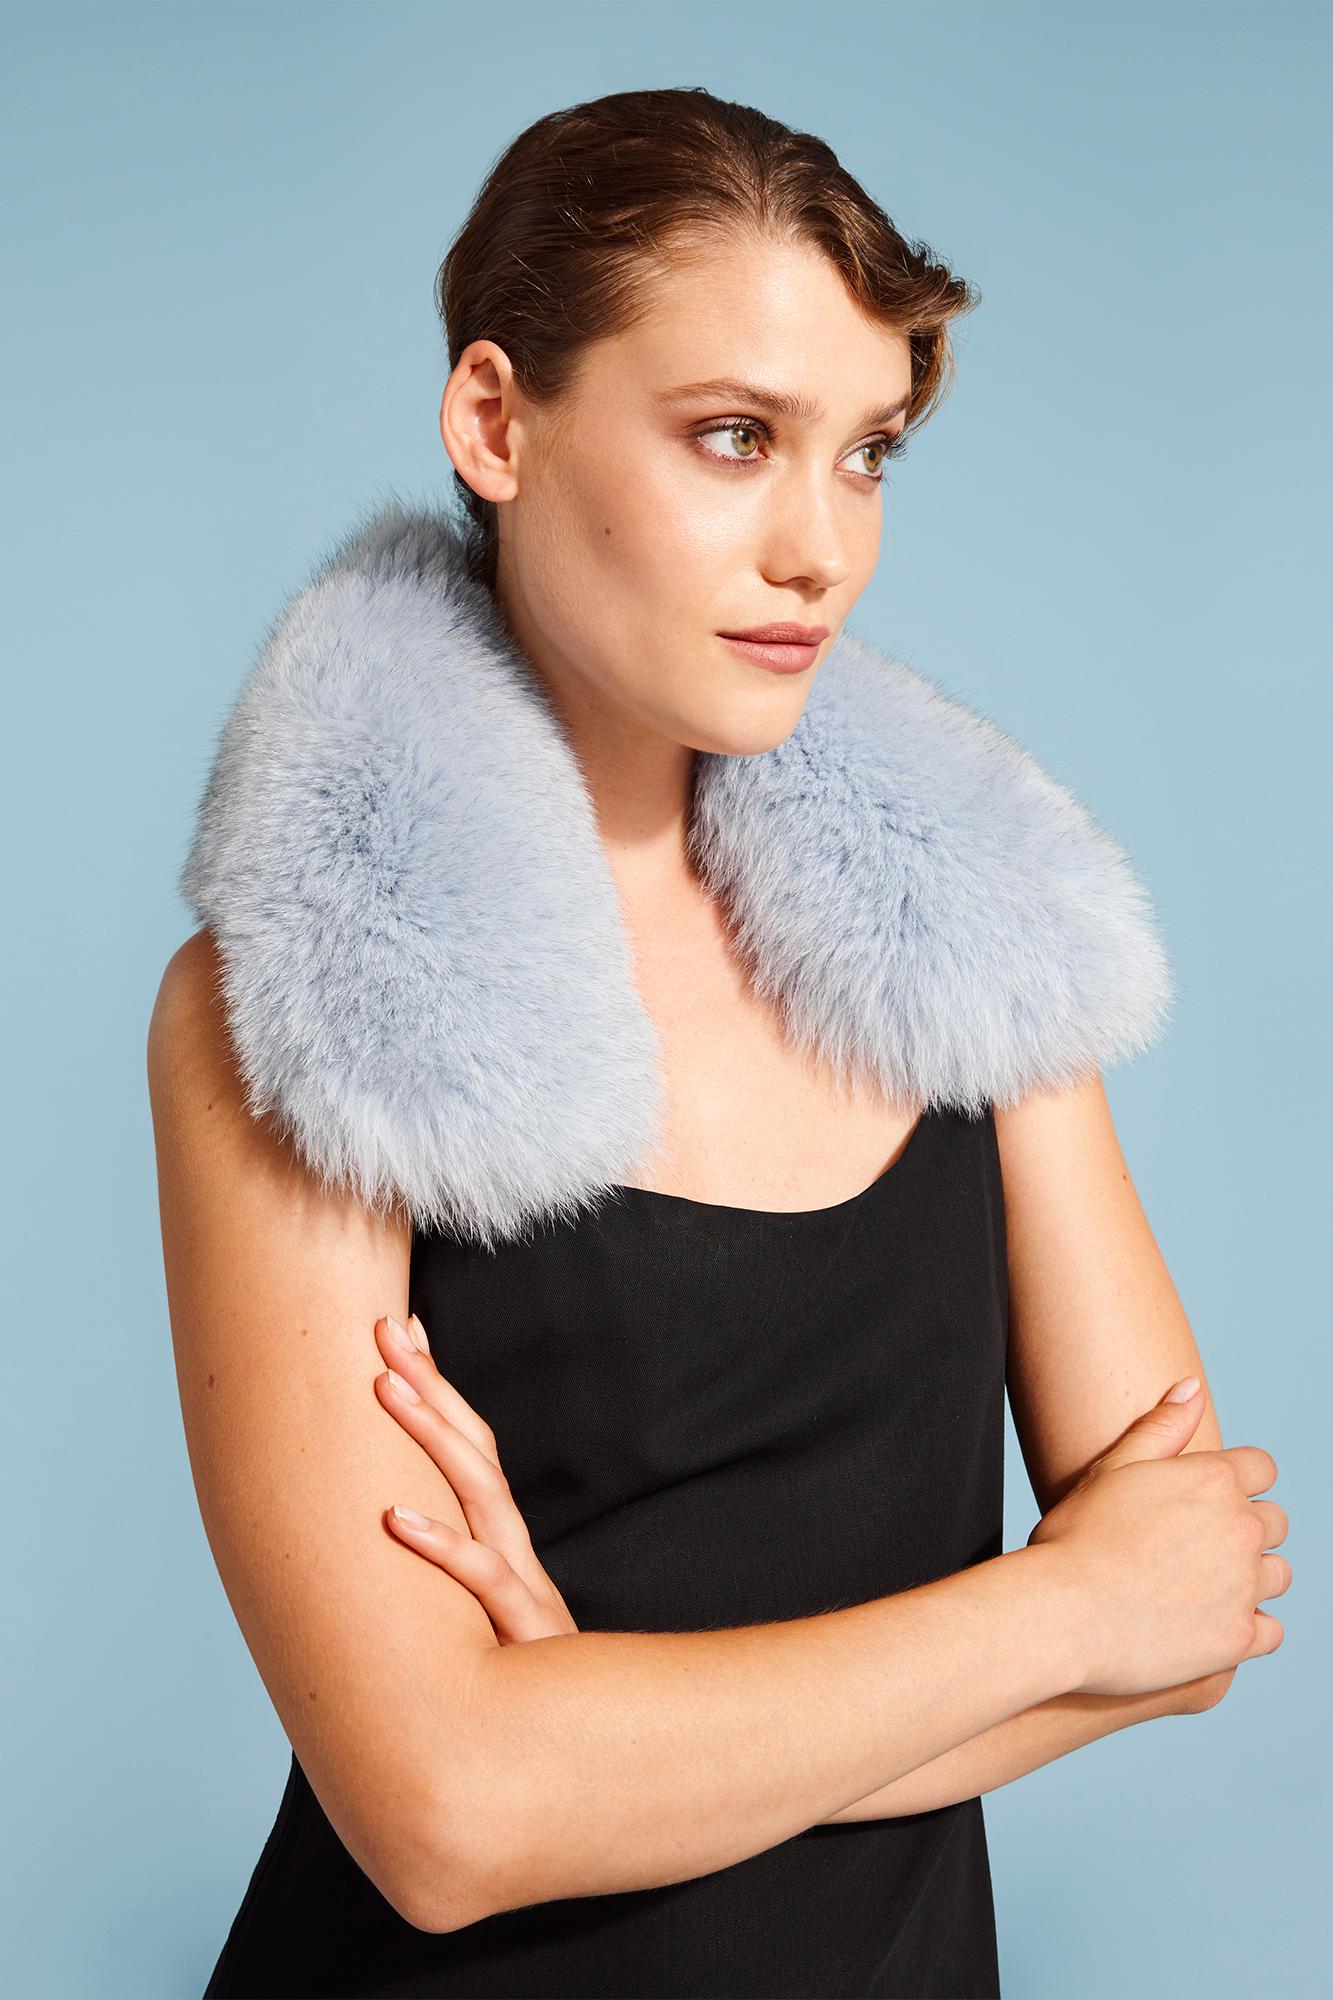 Verheyen London Peter Pan Collar in Iced Blue Fox Fur - Brand new 

The perfect Christmas gift which can be personally monogrammed on request.  The Peter Pan collar is Verheyen London’s classic staple for effortless style for casual wear.

To throw